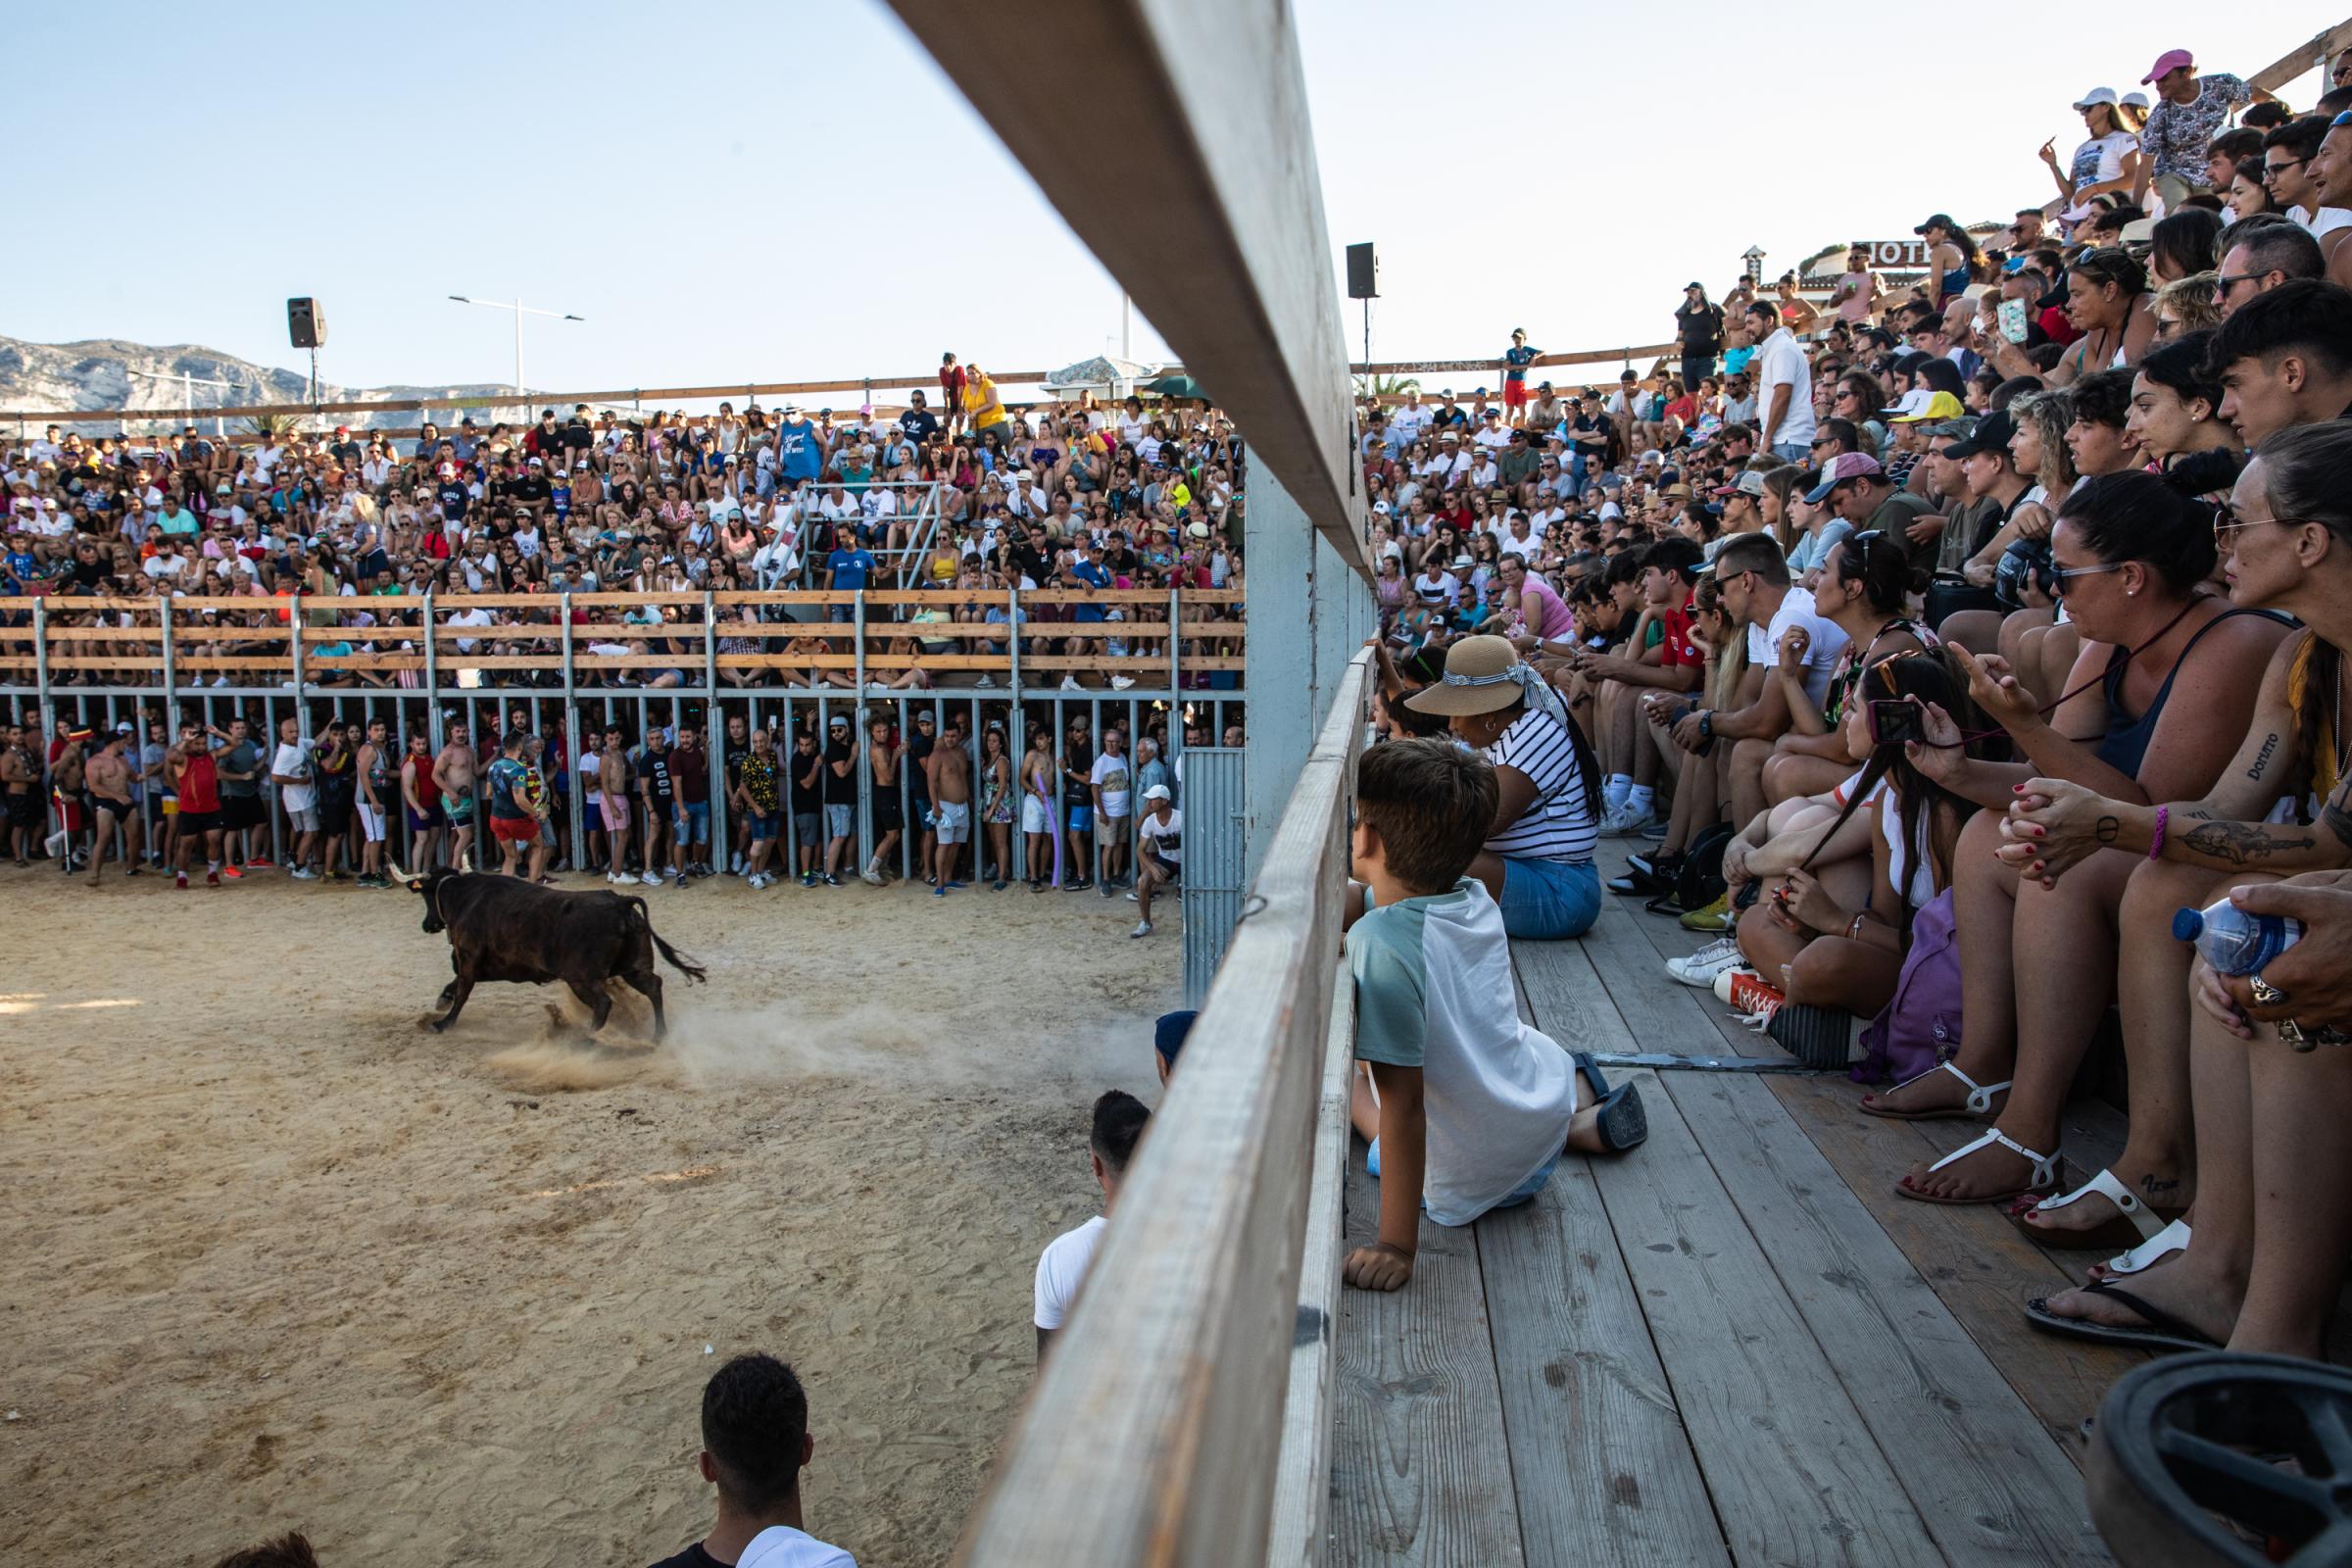 At 'Bous A La Mar', Revelers Take Plunge To Dodge Bulls And Beat The Heat - DENIA, SPAIN - JULY 17: Tourists and locals watch the...